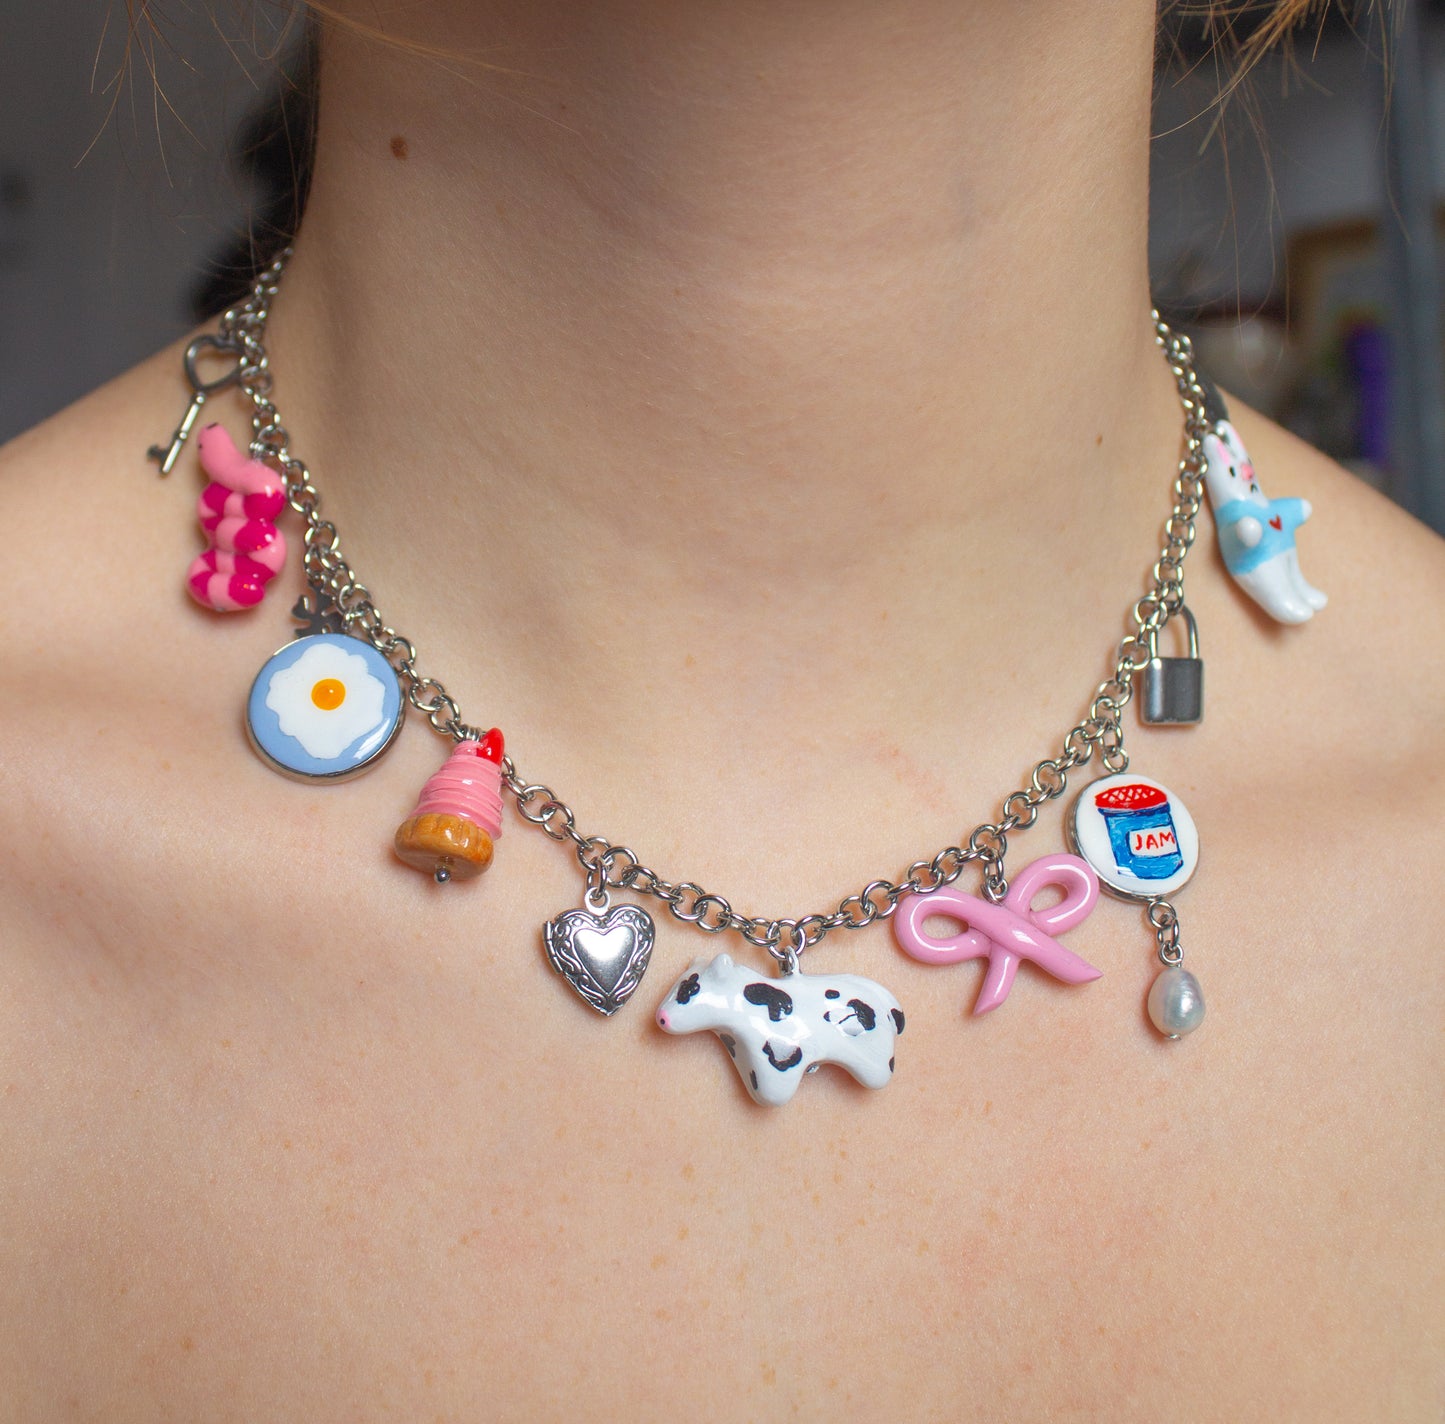 Galentine's charm necklace